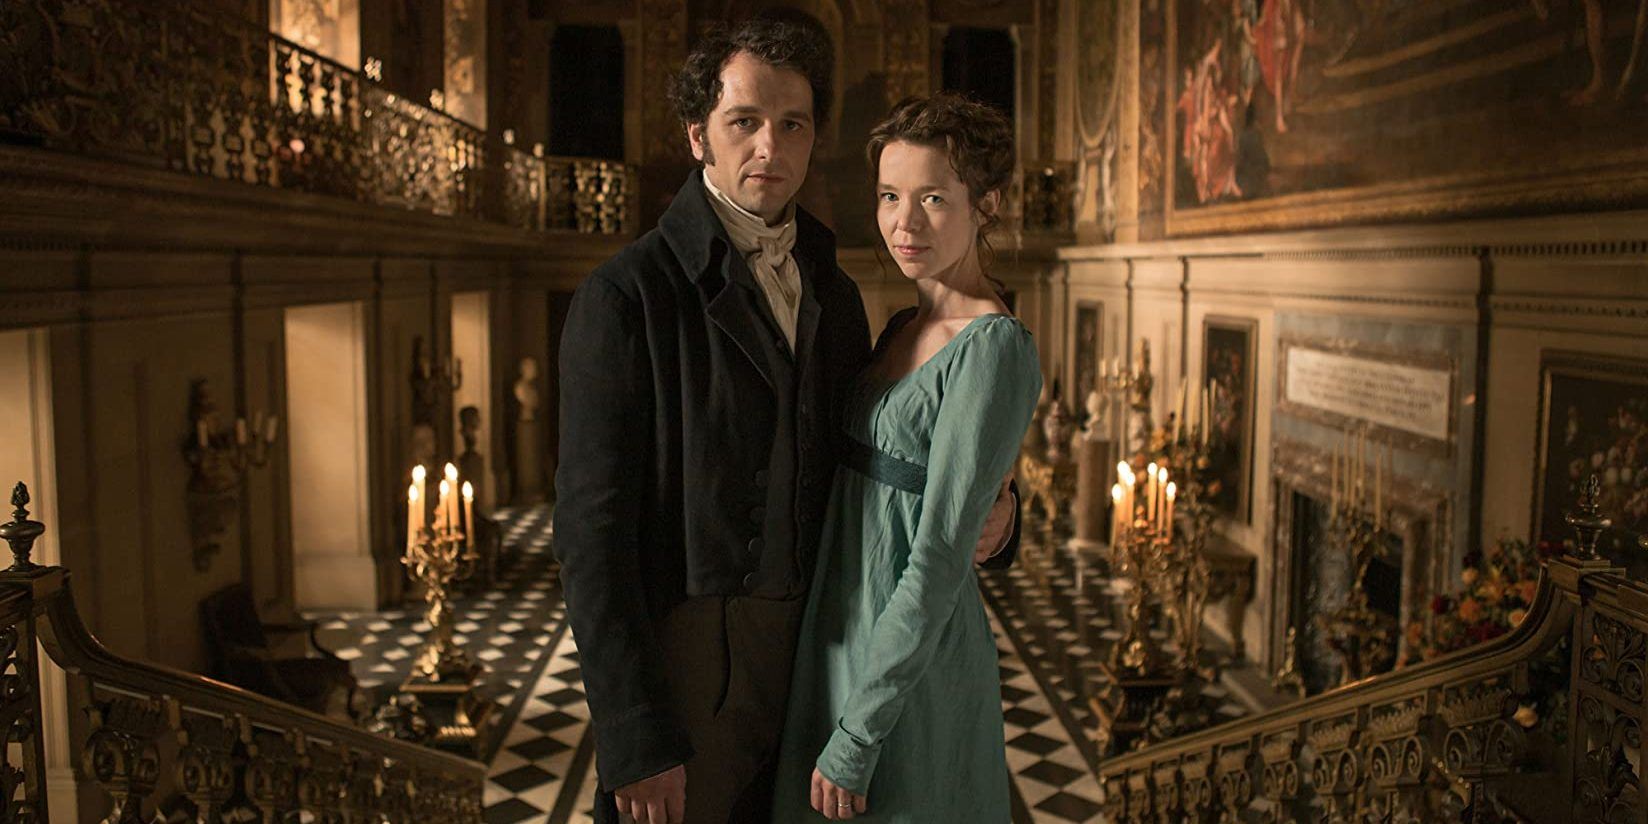 Darcy and Elizabeth stand with their arms around each other and face the audience on the stairs in Death Comes To Pemberley